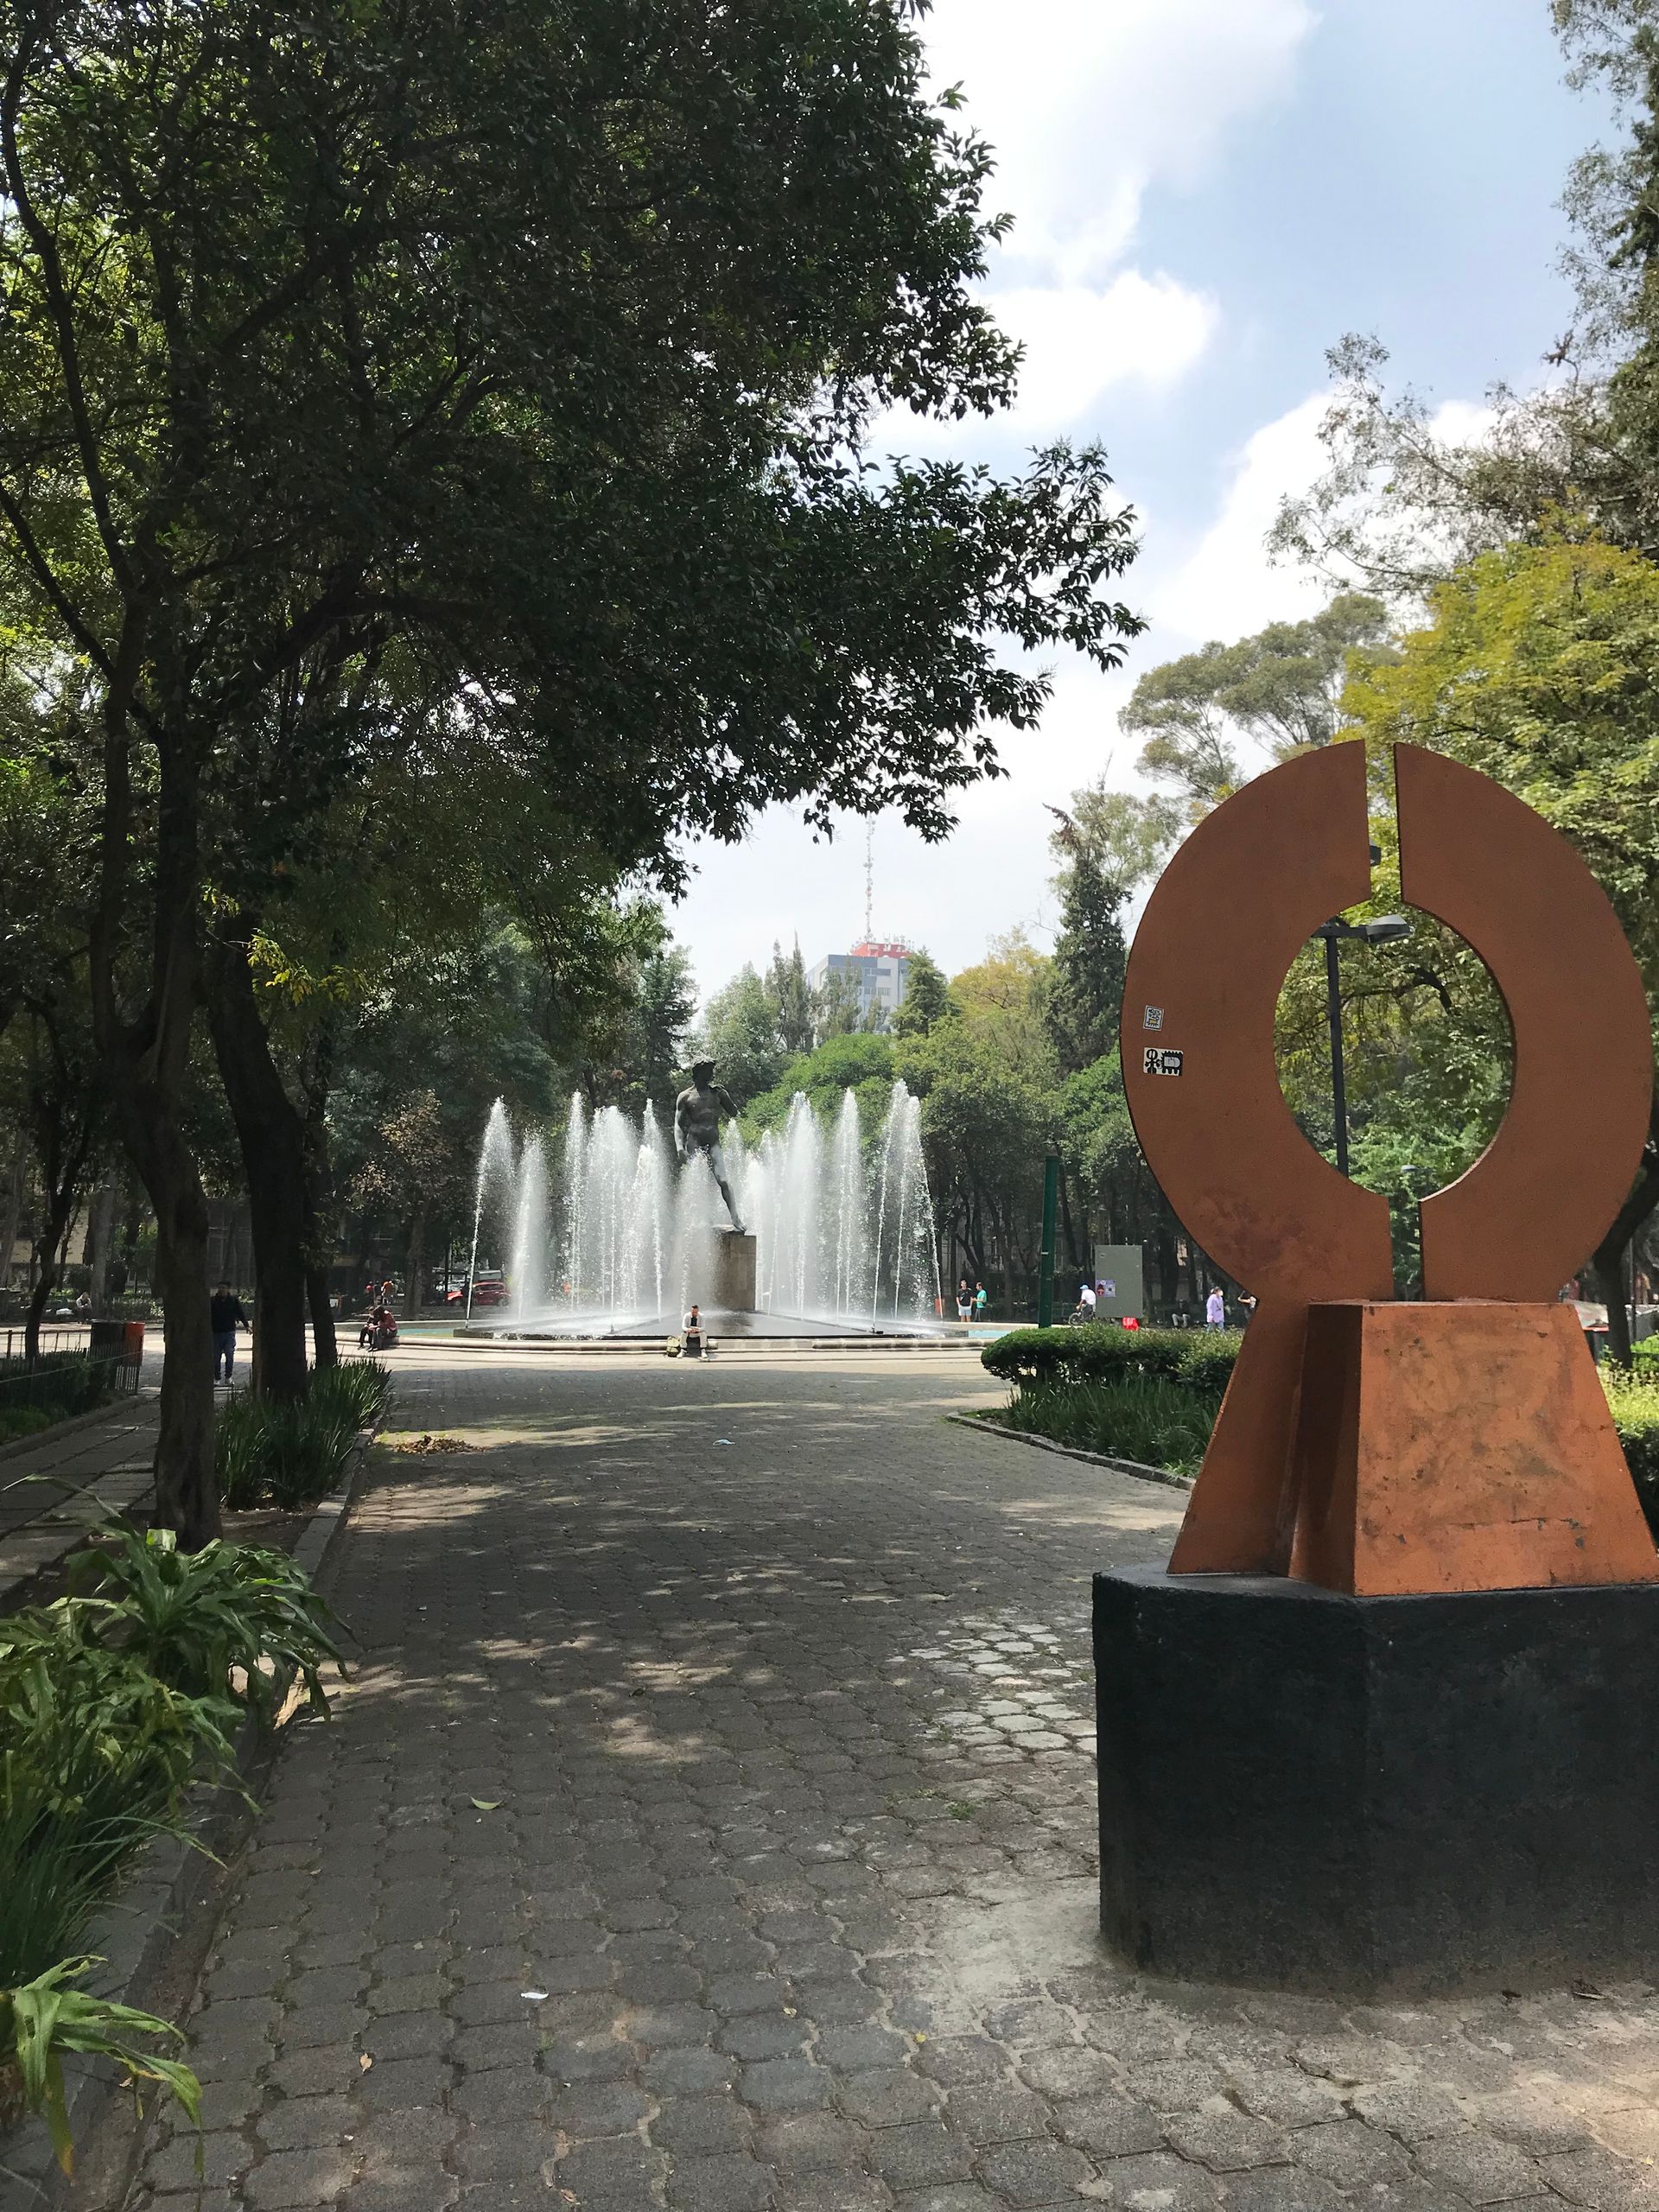 The Central Park of Mexico